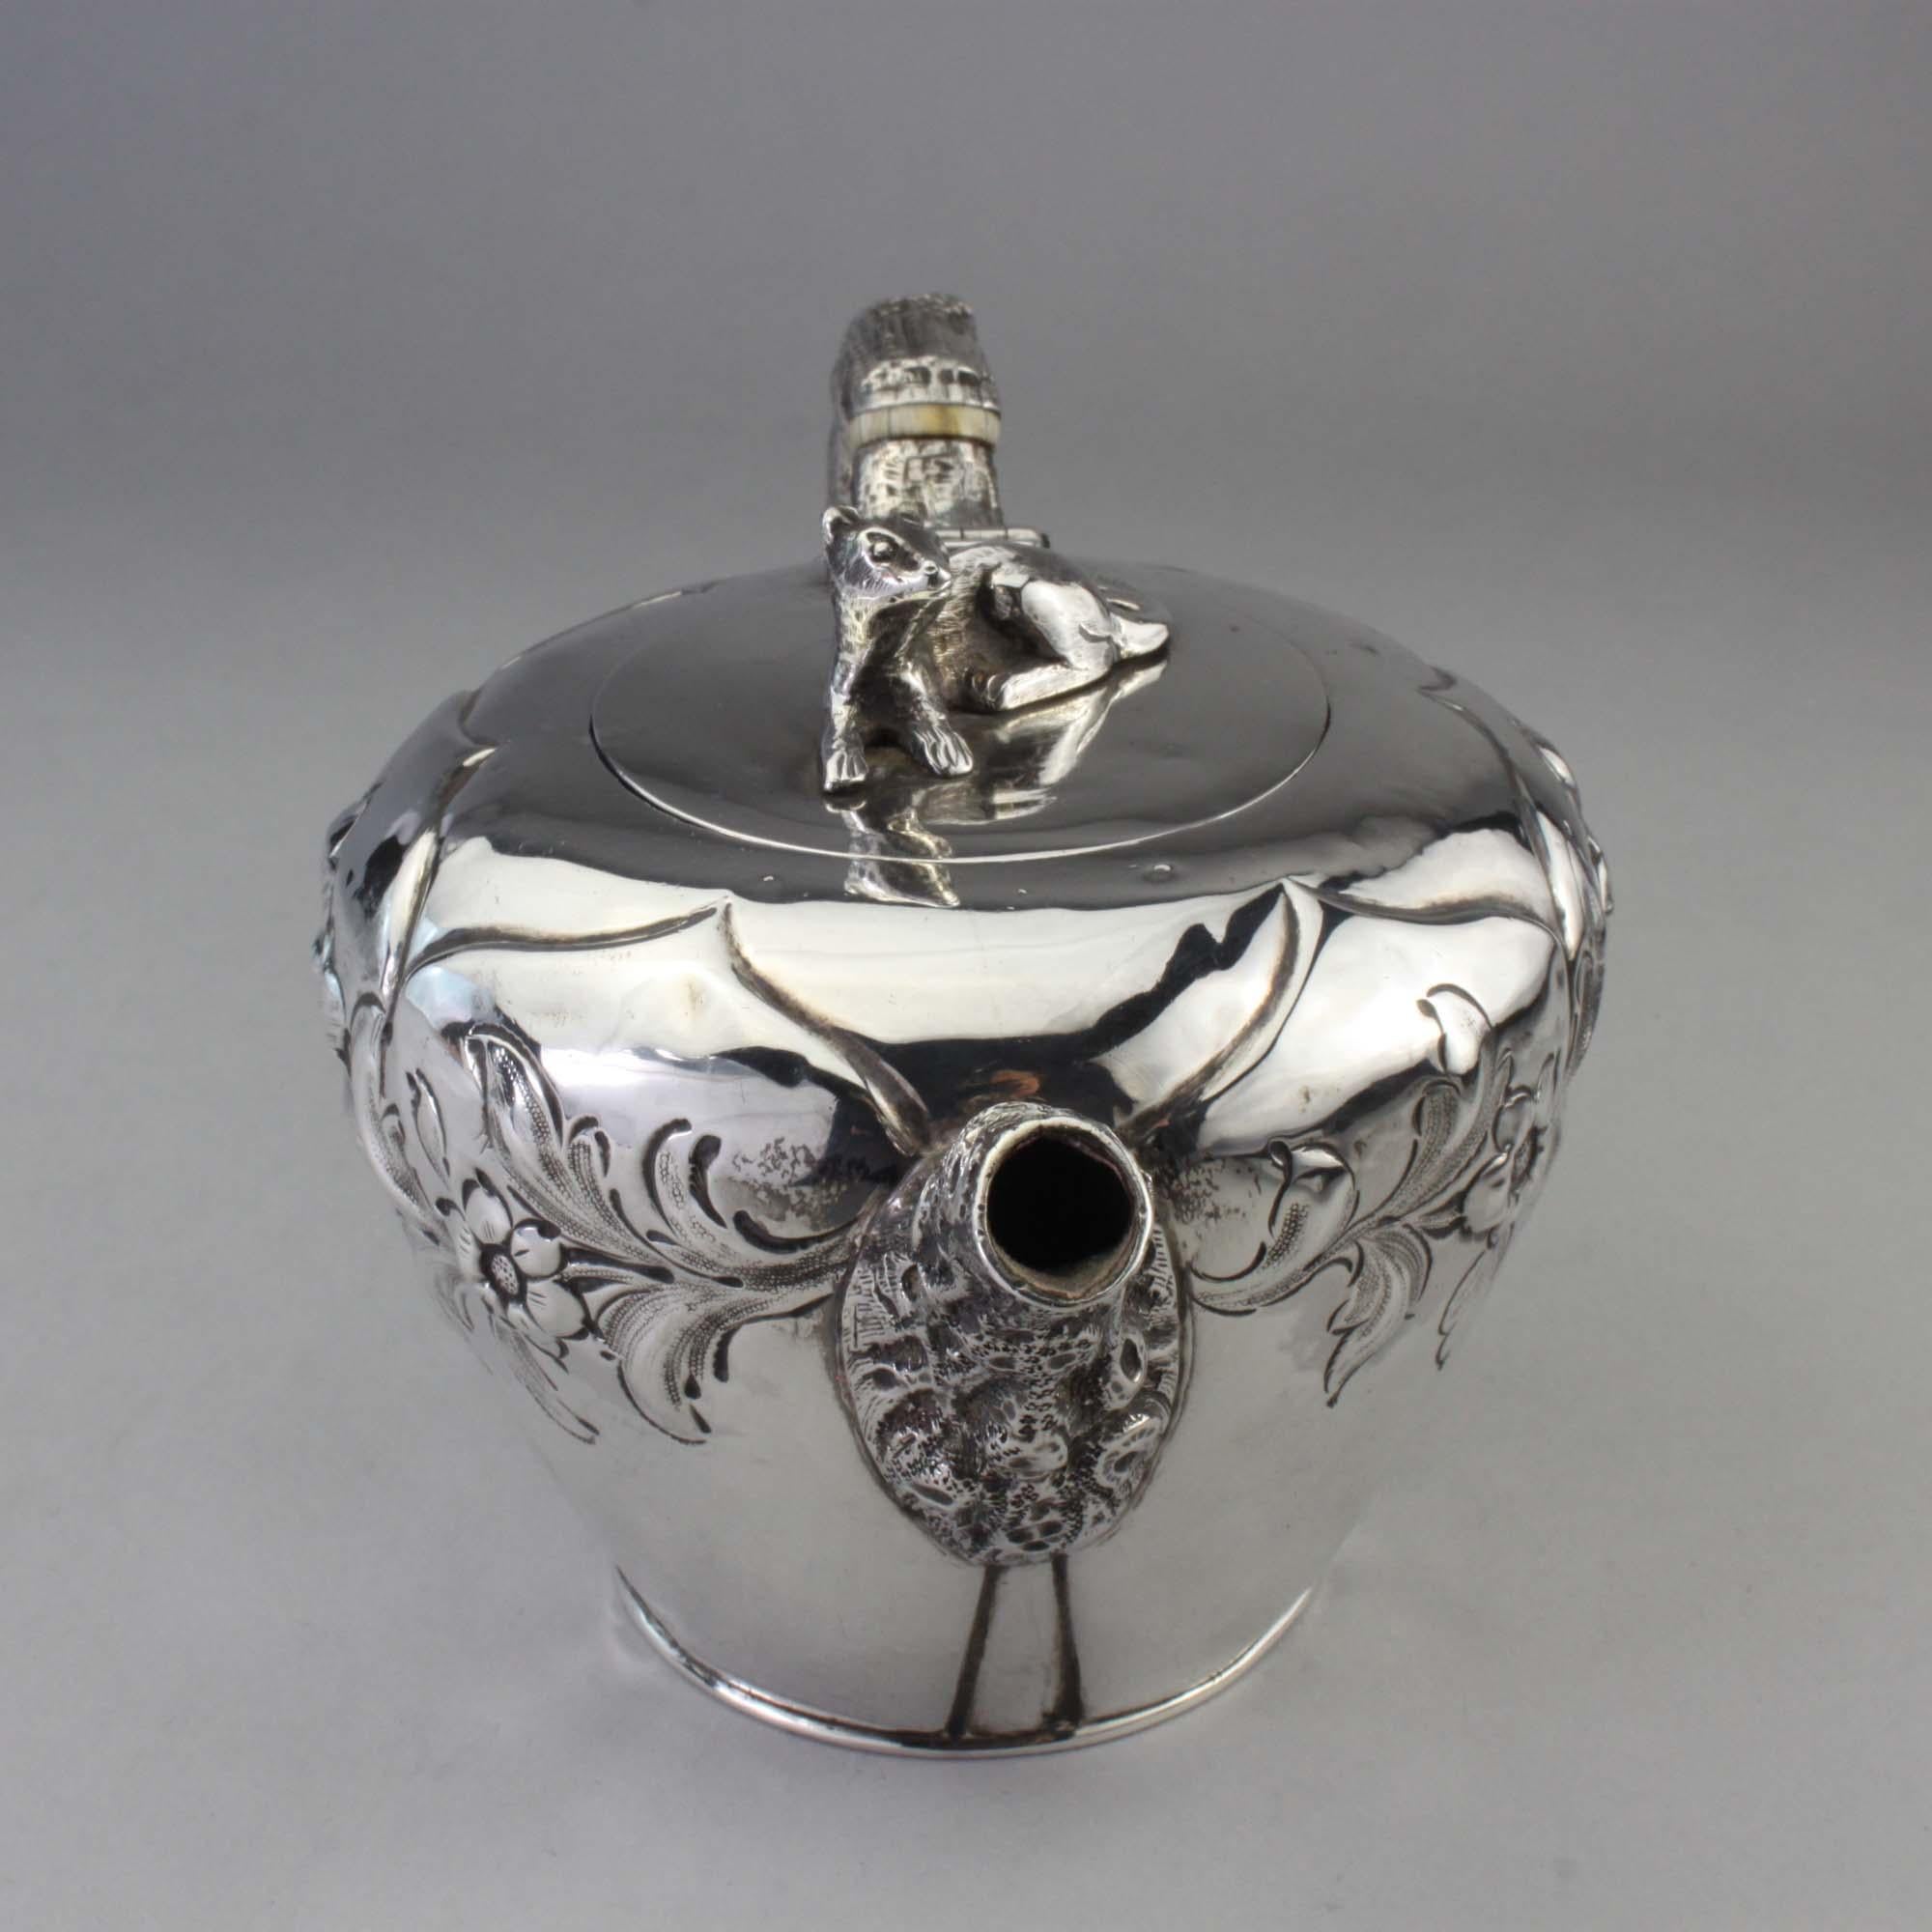 European Antique Victorian Sterling Silver Bachelor's Tea Pot by William Moulson For Sale